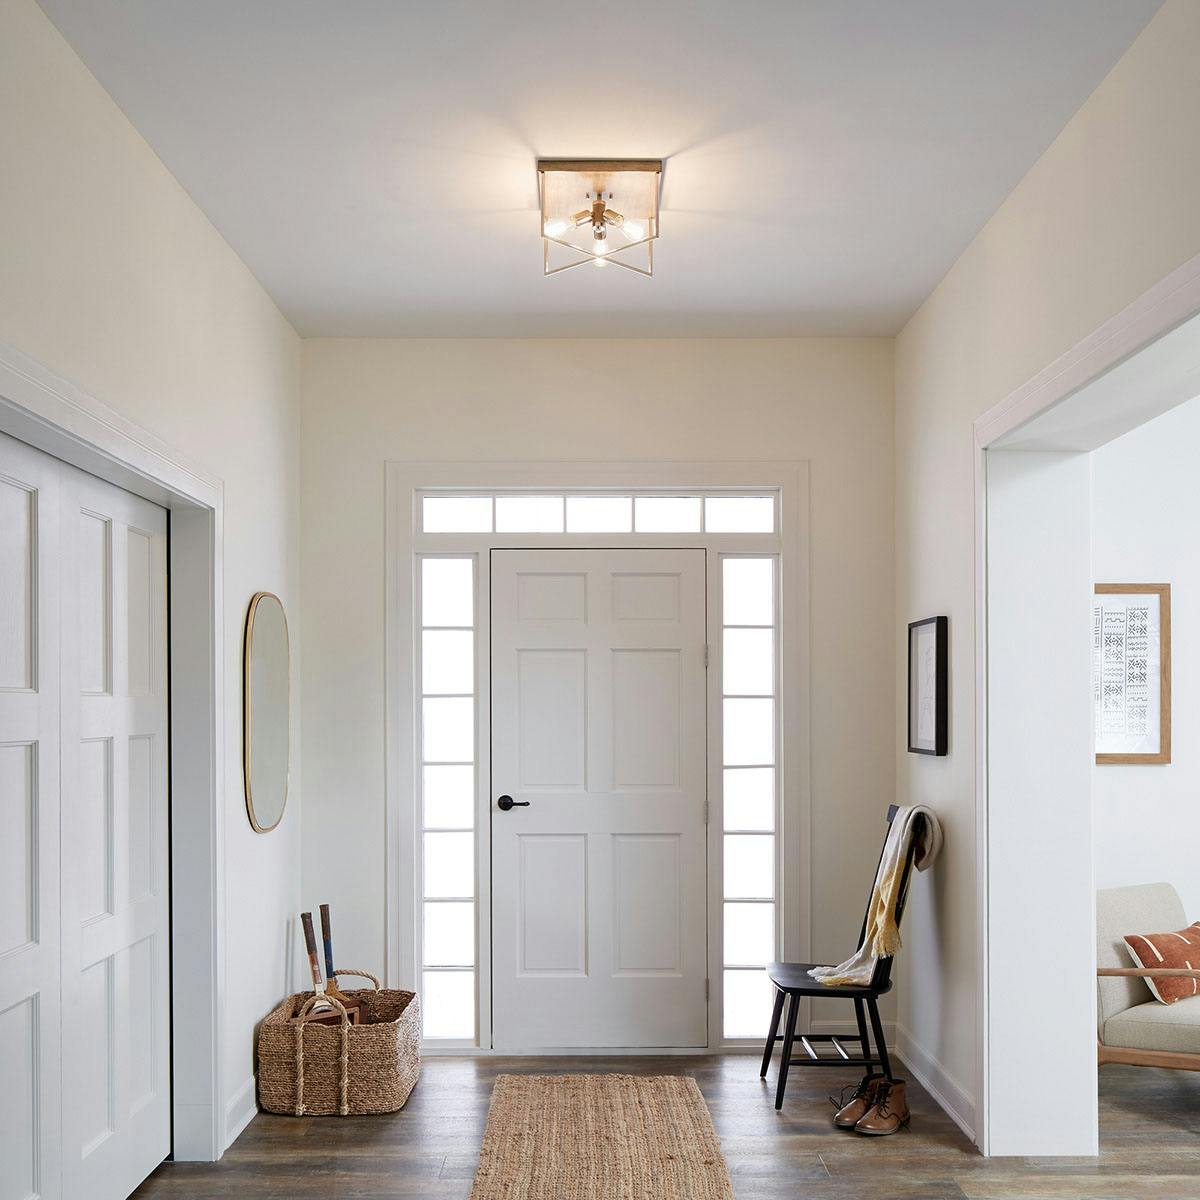 Day time Hallway image featuring Tanis flush mount light 52094DAG